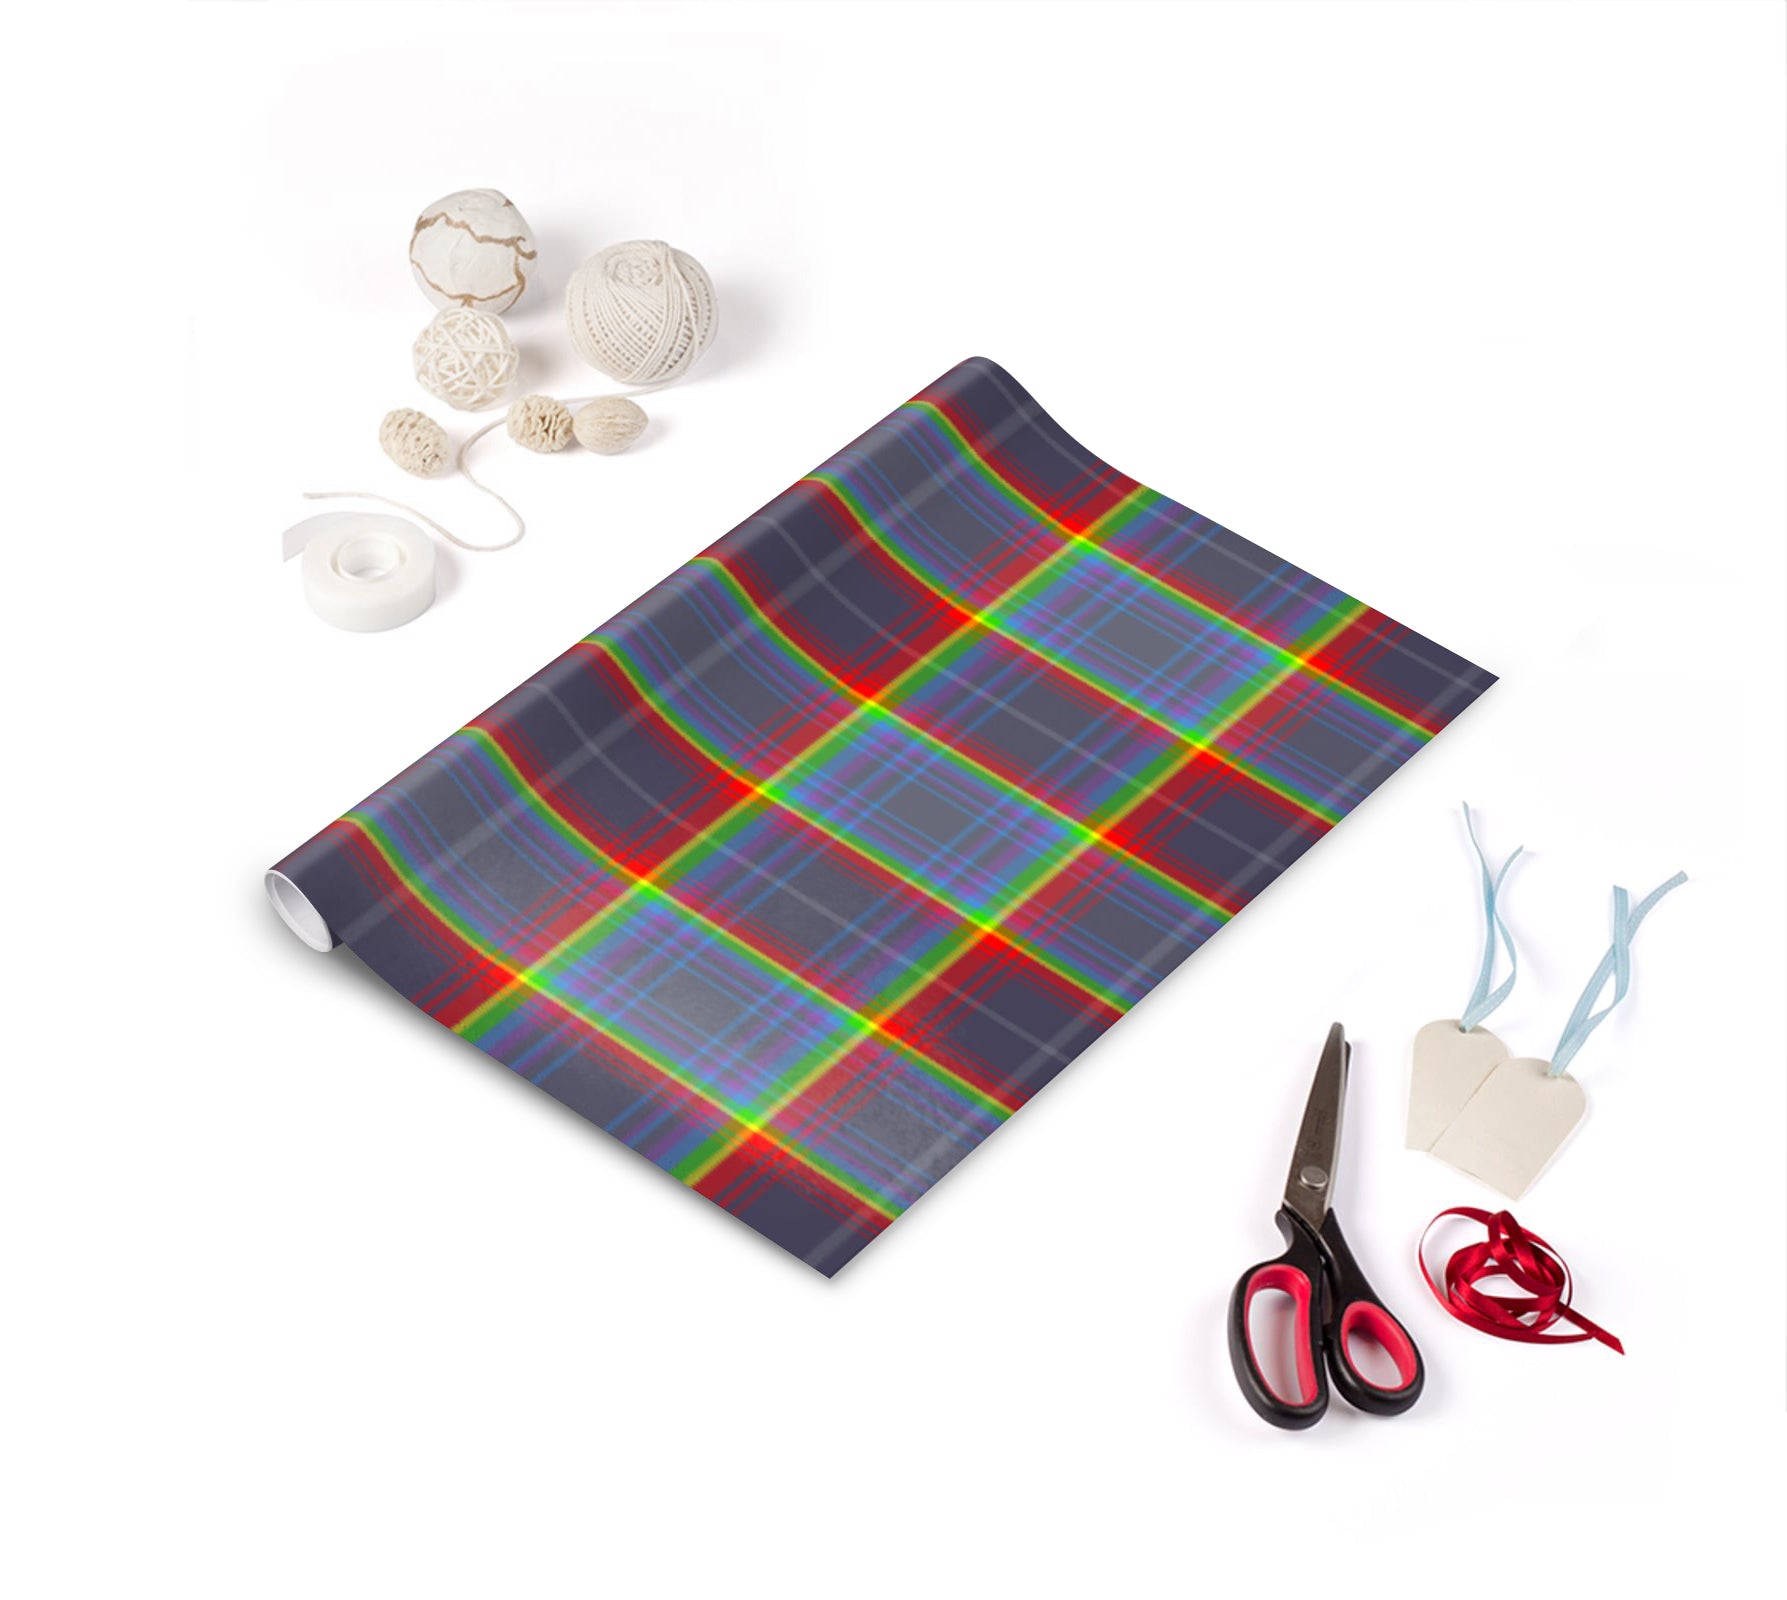 Designer wrapping paper exclusive to the Tartan Artisan ®. Featuring the tartan ...Scotland's Grace. Inspired after the designer witnessed an unusually bright double rainbow during a heavy cloudburst in full sunshine, which appeared over Arbroath east coast of Scotland on 9th May 2014